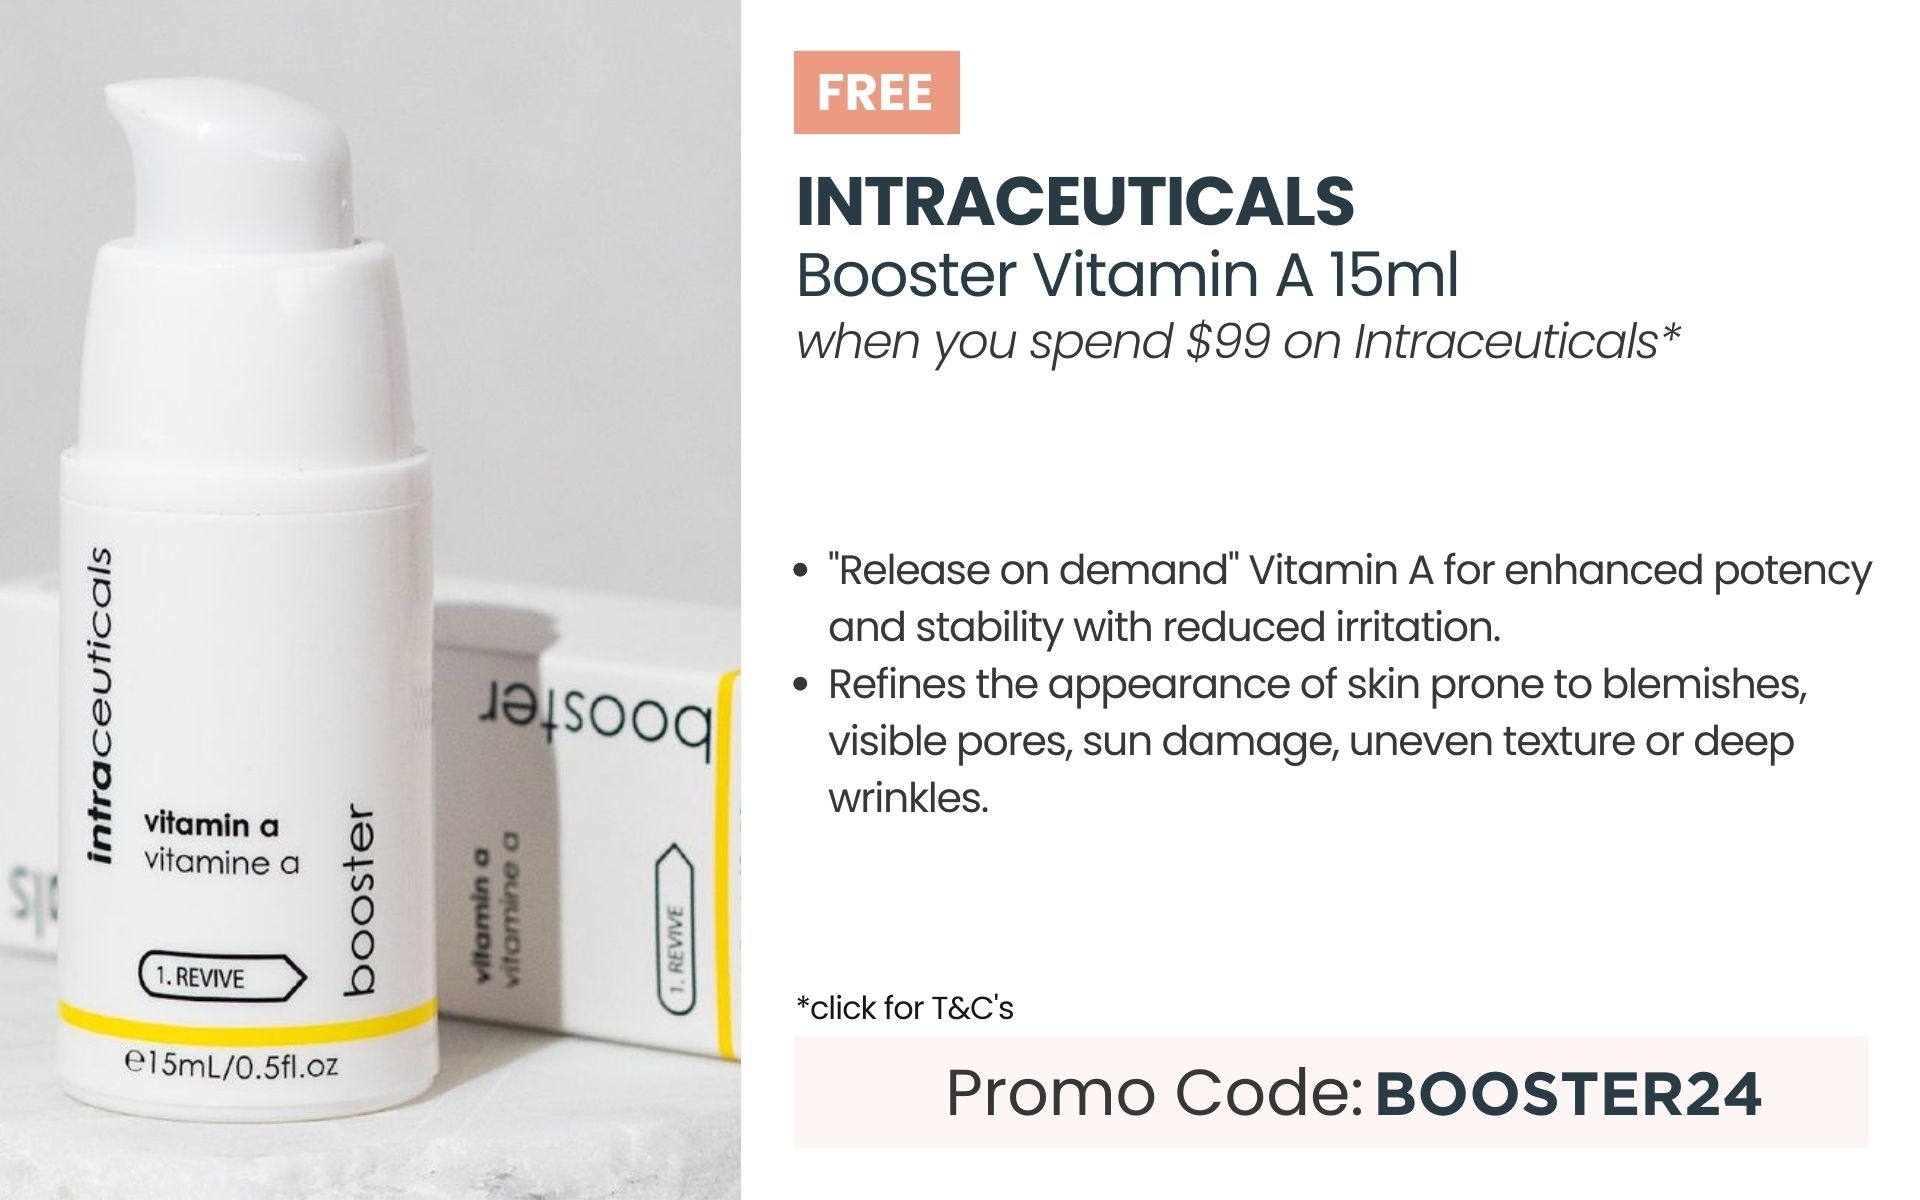 FREE Intraceuticals Booster Vitamin A 15ml worth $51. Min spend $99 on Intraceuticals. Promo code: BOOSTER24